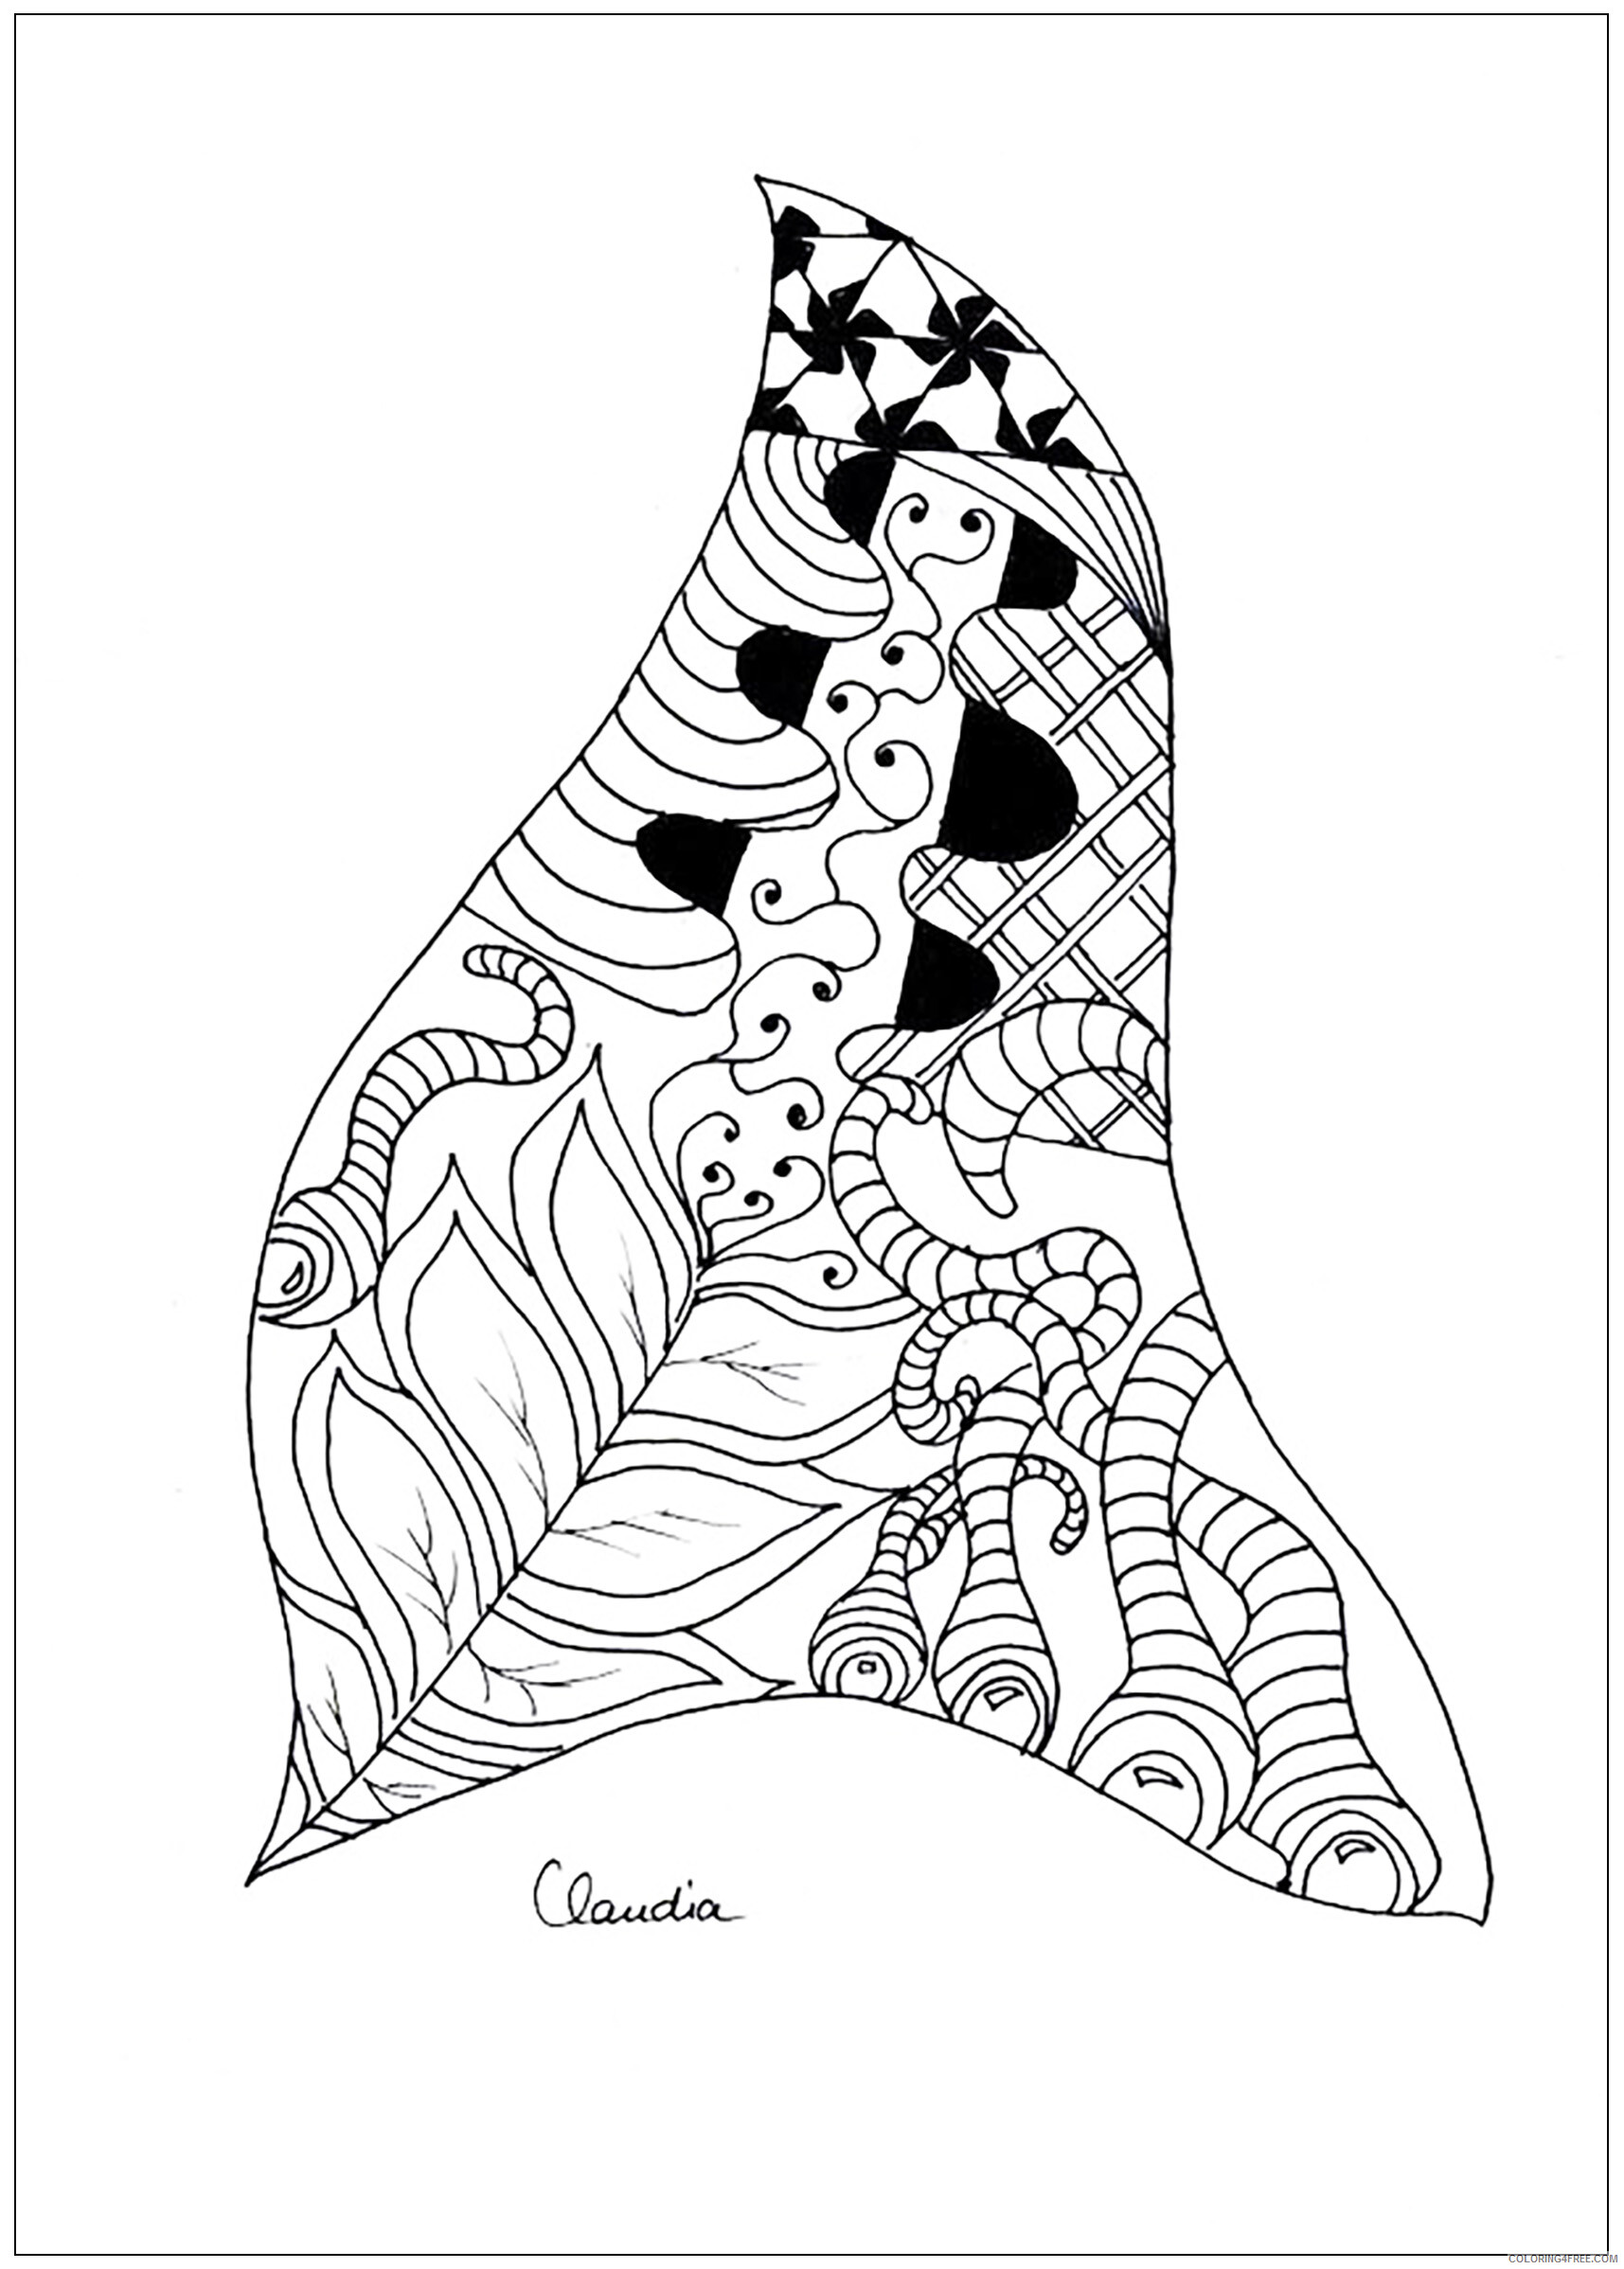 Adult Zentangle Coloring Pages adult zentangle simple by claudia 2 Printable 2020 120 Coloring4free